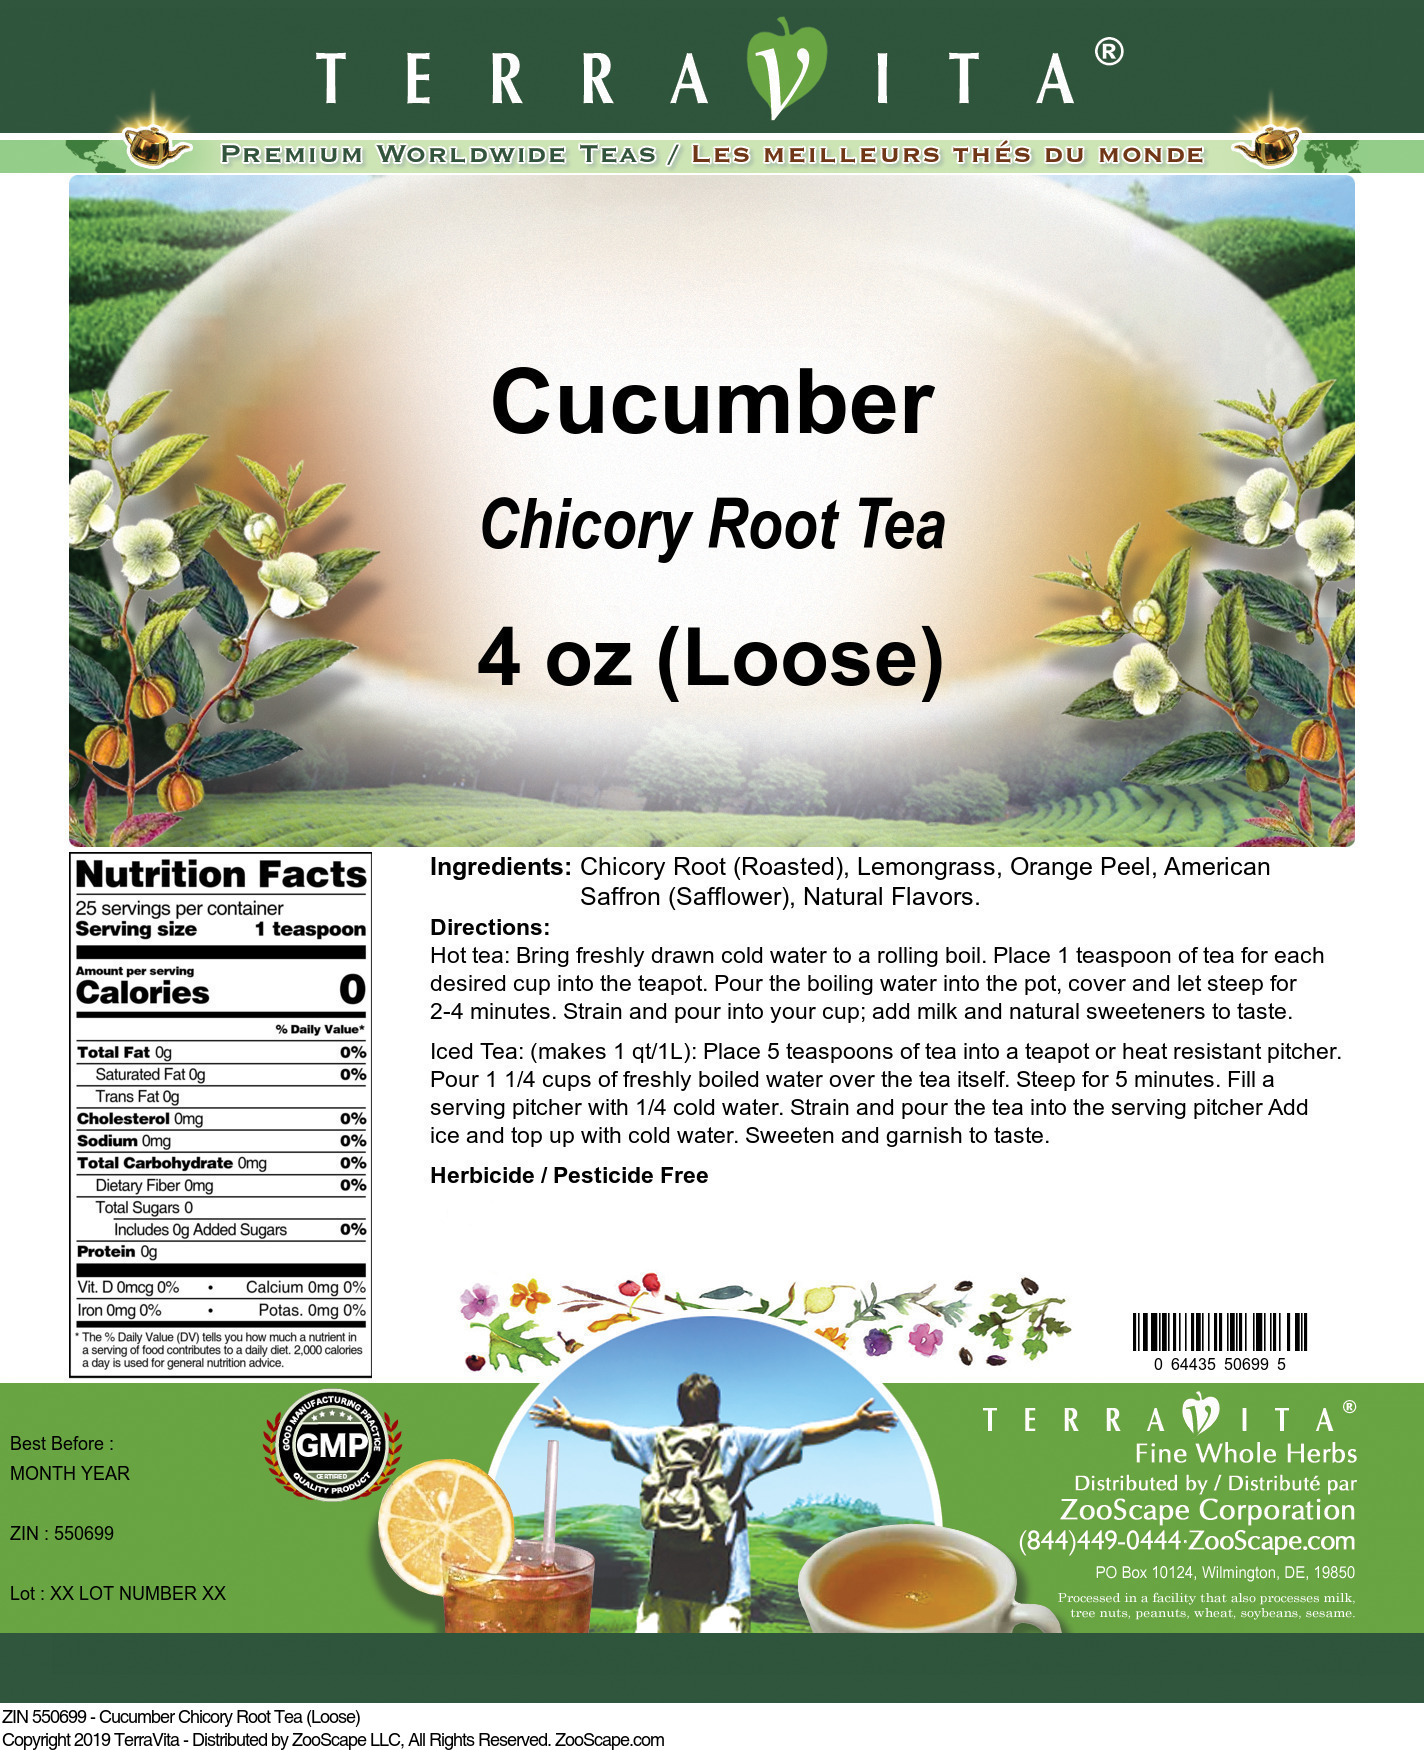 Cucumber Chicory Root Tea (Loose) - Label